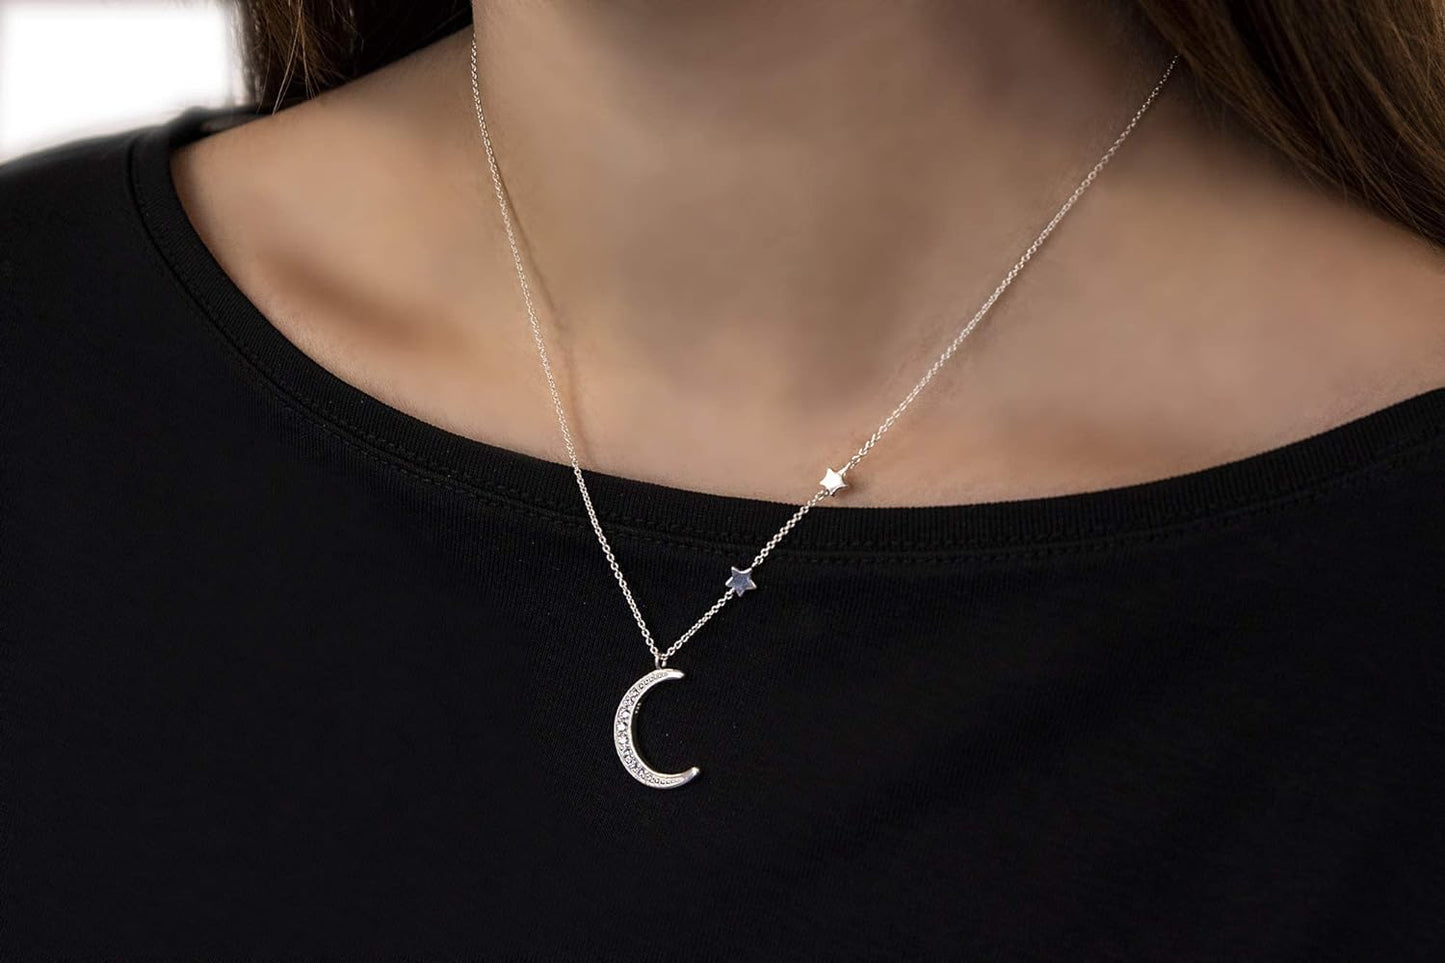 925 Sterling Silver CZ Crescent Moon and Star Necklace For Her